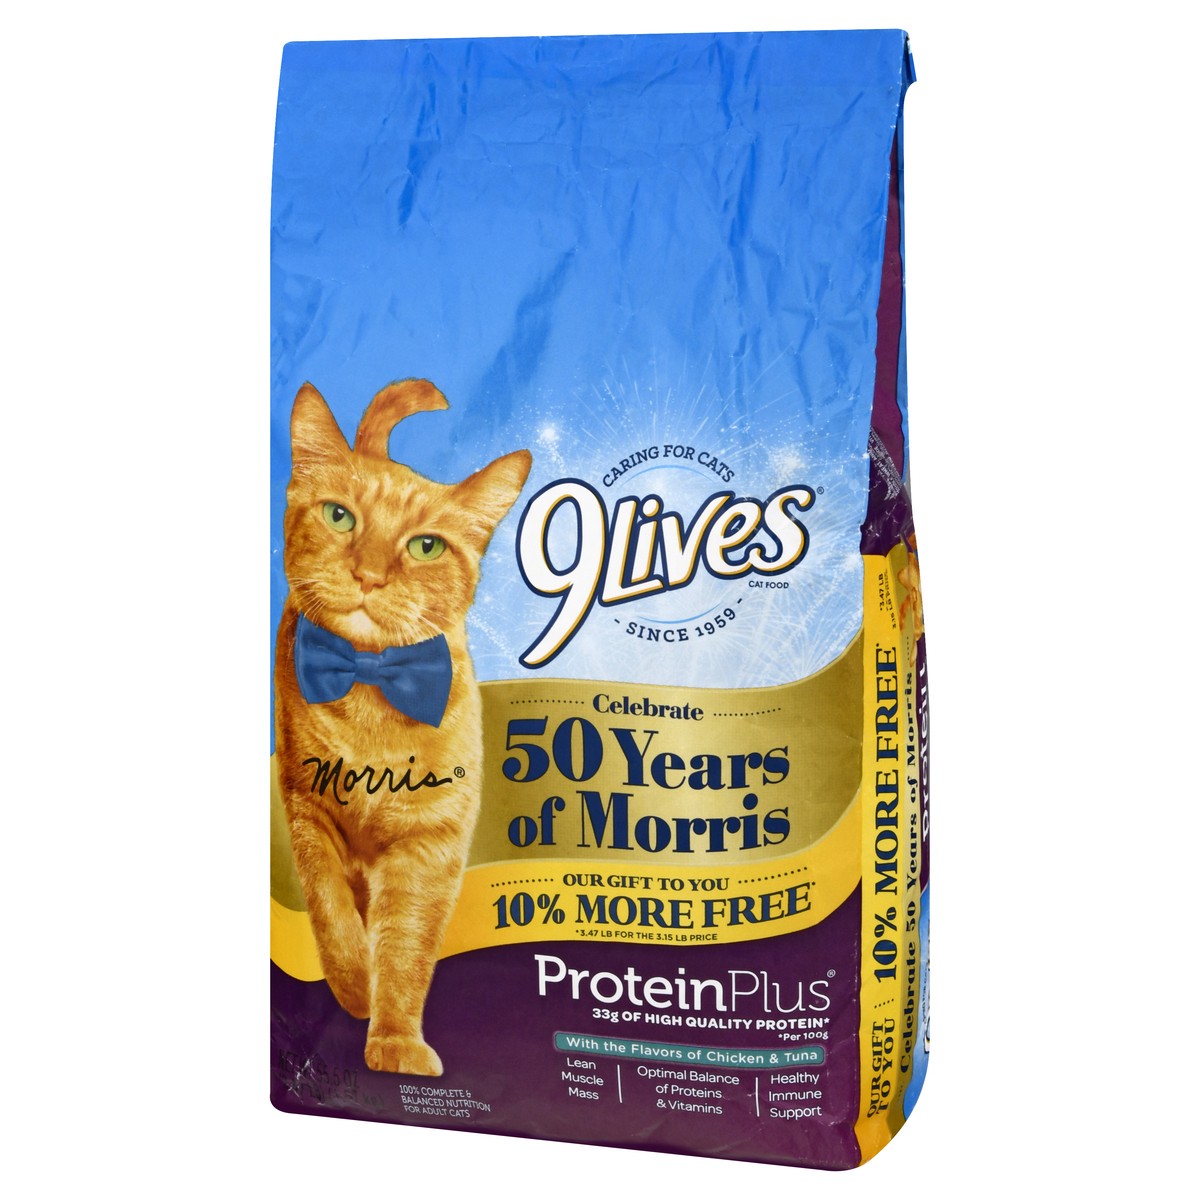 slide 3 of 9, 9Lives Protein Plus Dry Cat Food with Flavors of Chicken & Tuna, 3.47 lb